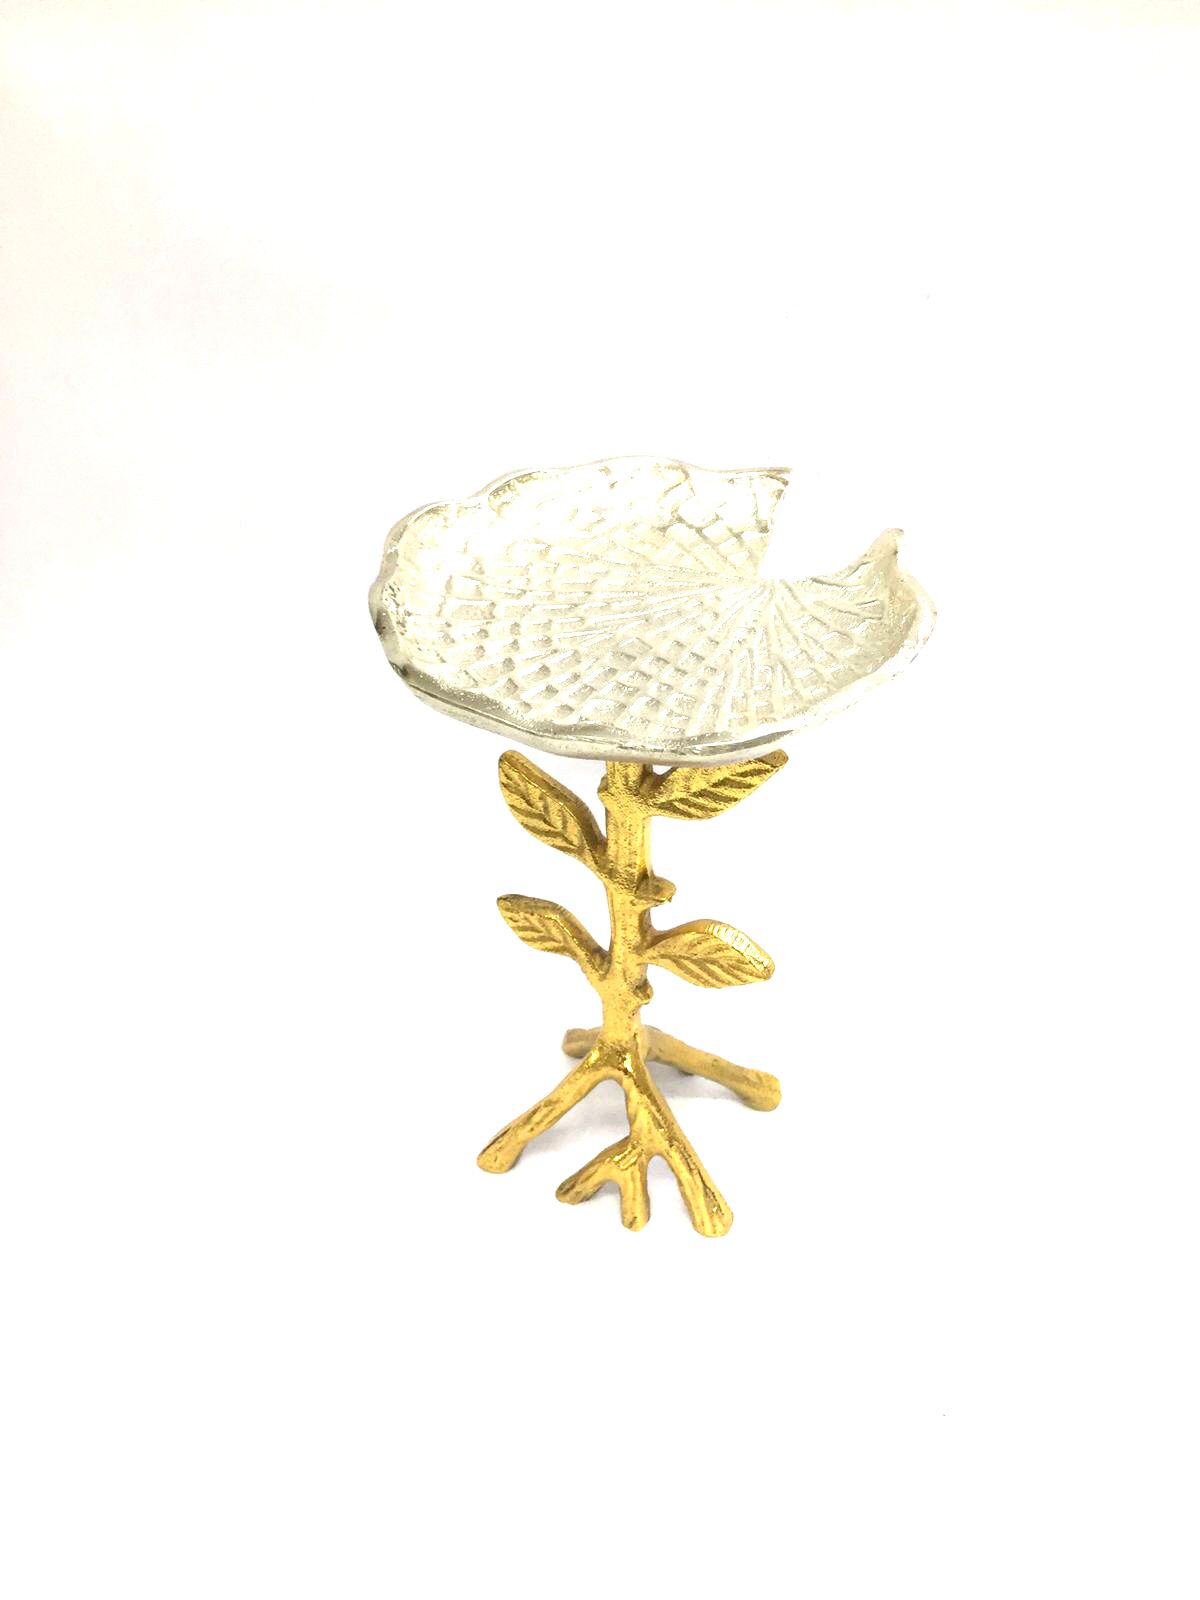 Silver Lotus With Gold Leaf Stand Platters Metal Art Kitchen From Tamrapatra